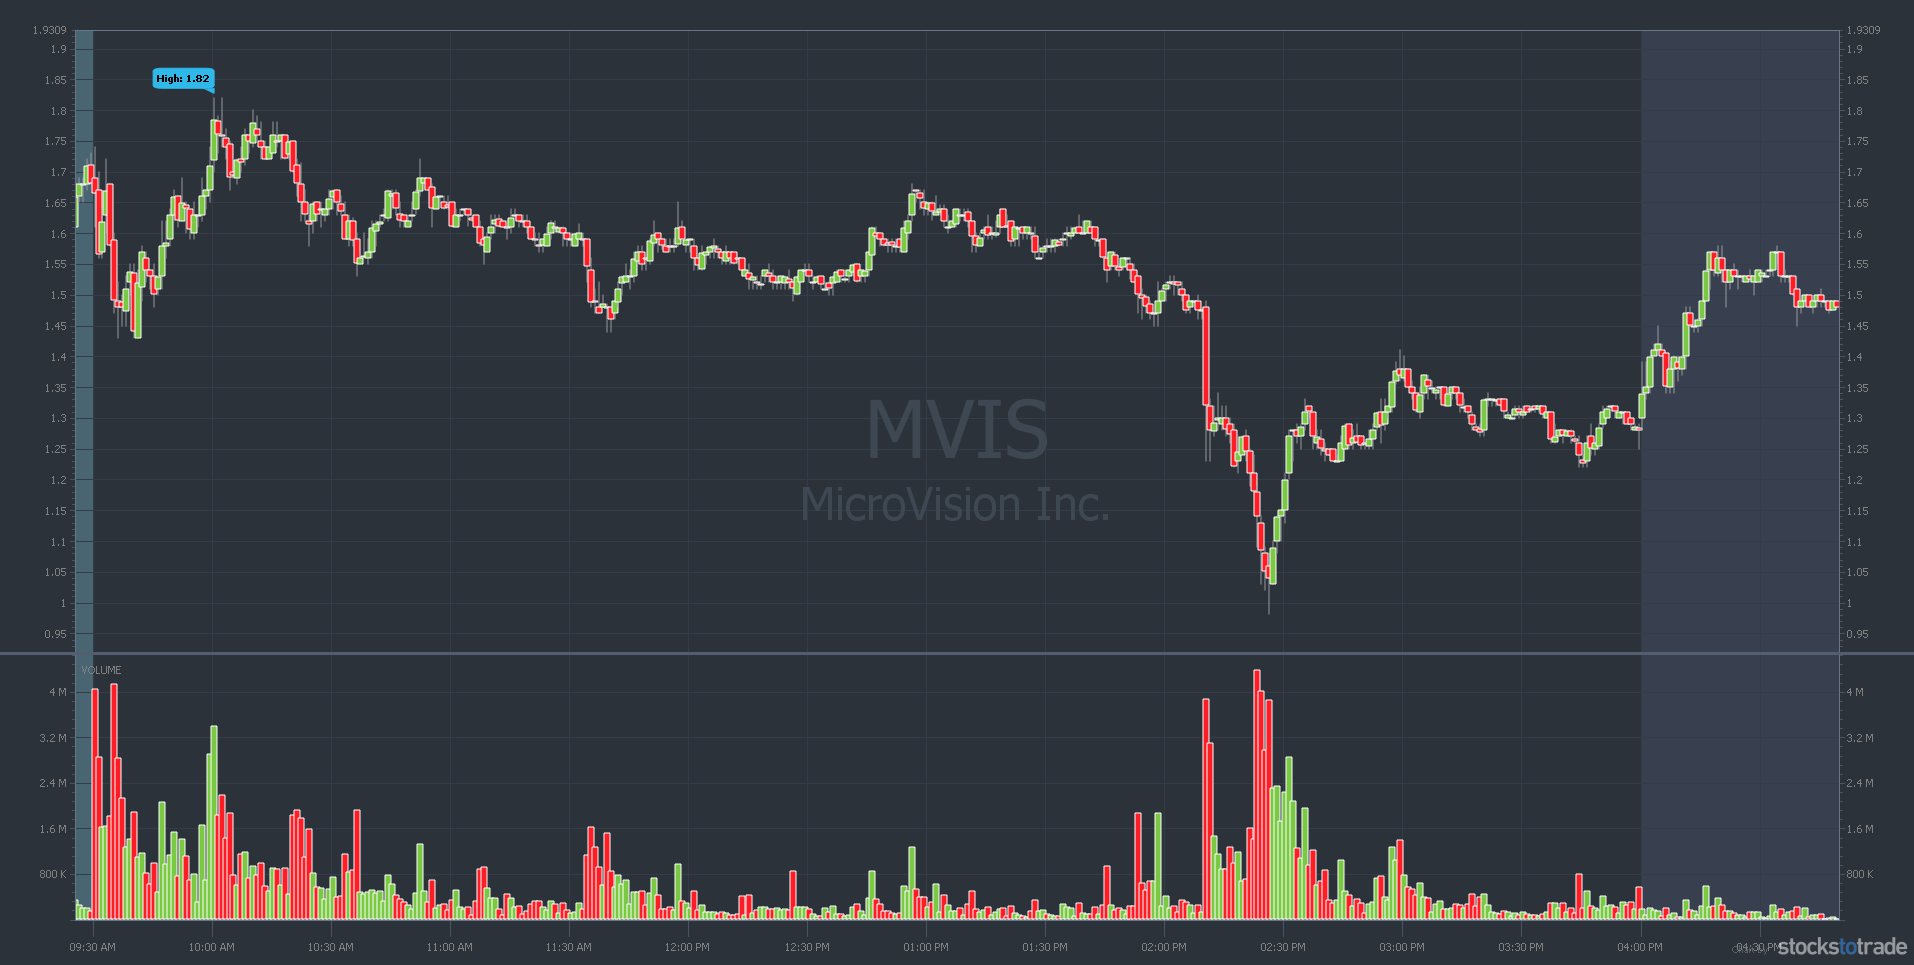 MVIS chart: May 5 intraday, 1-minute candle, classic dip buy pattern: money time